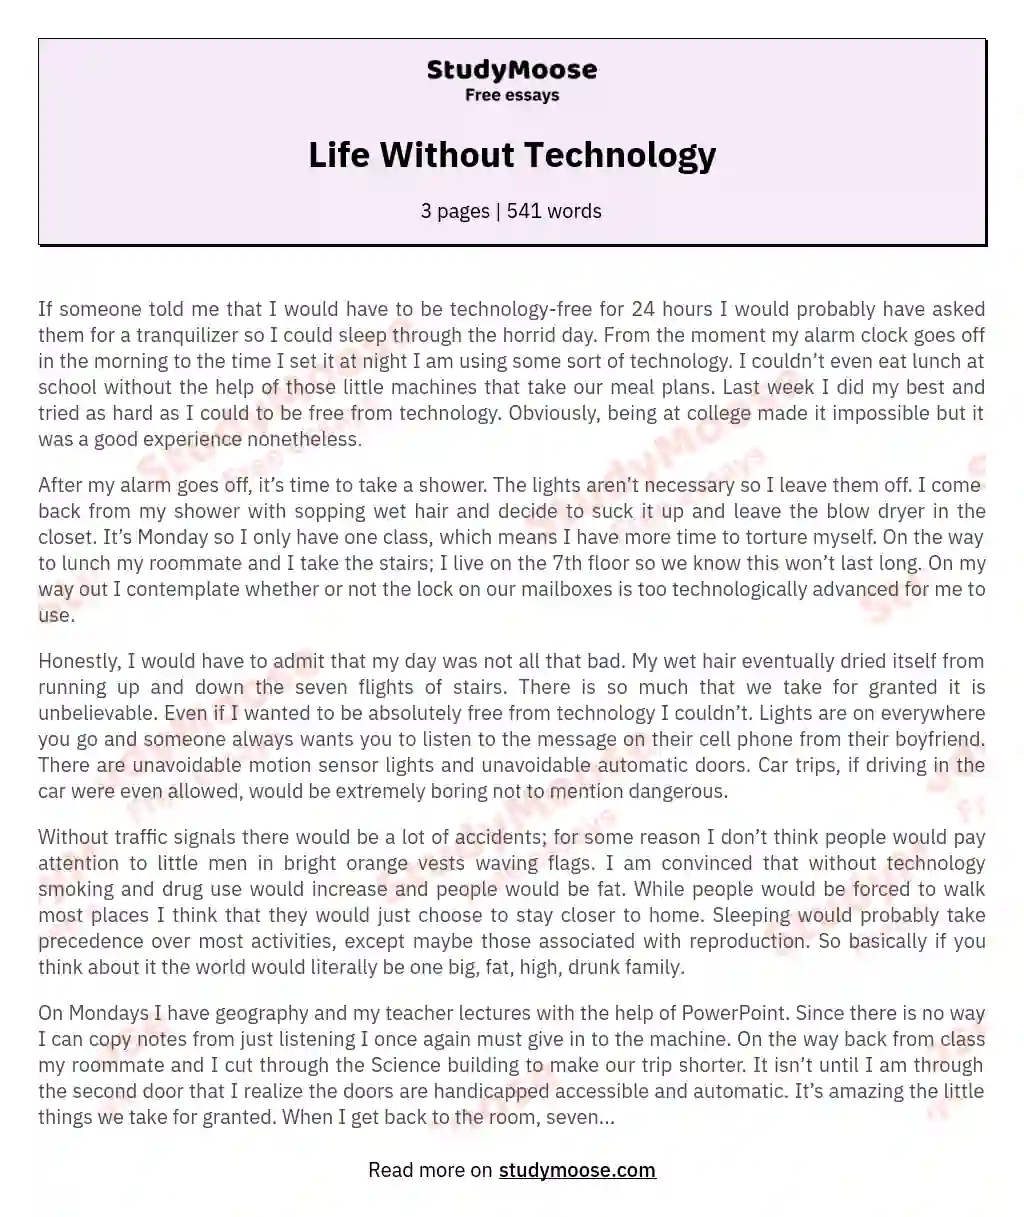 Life Without Technology essay